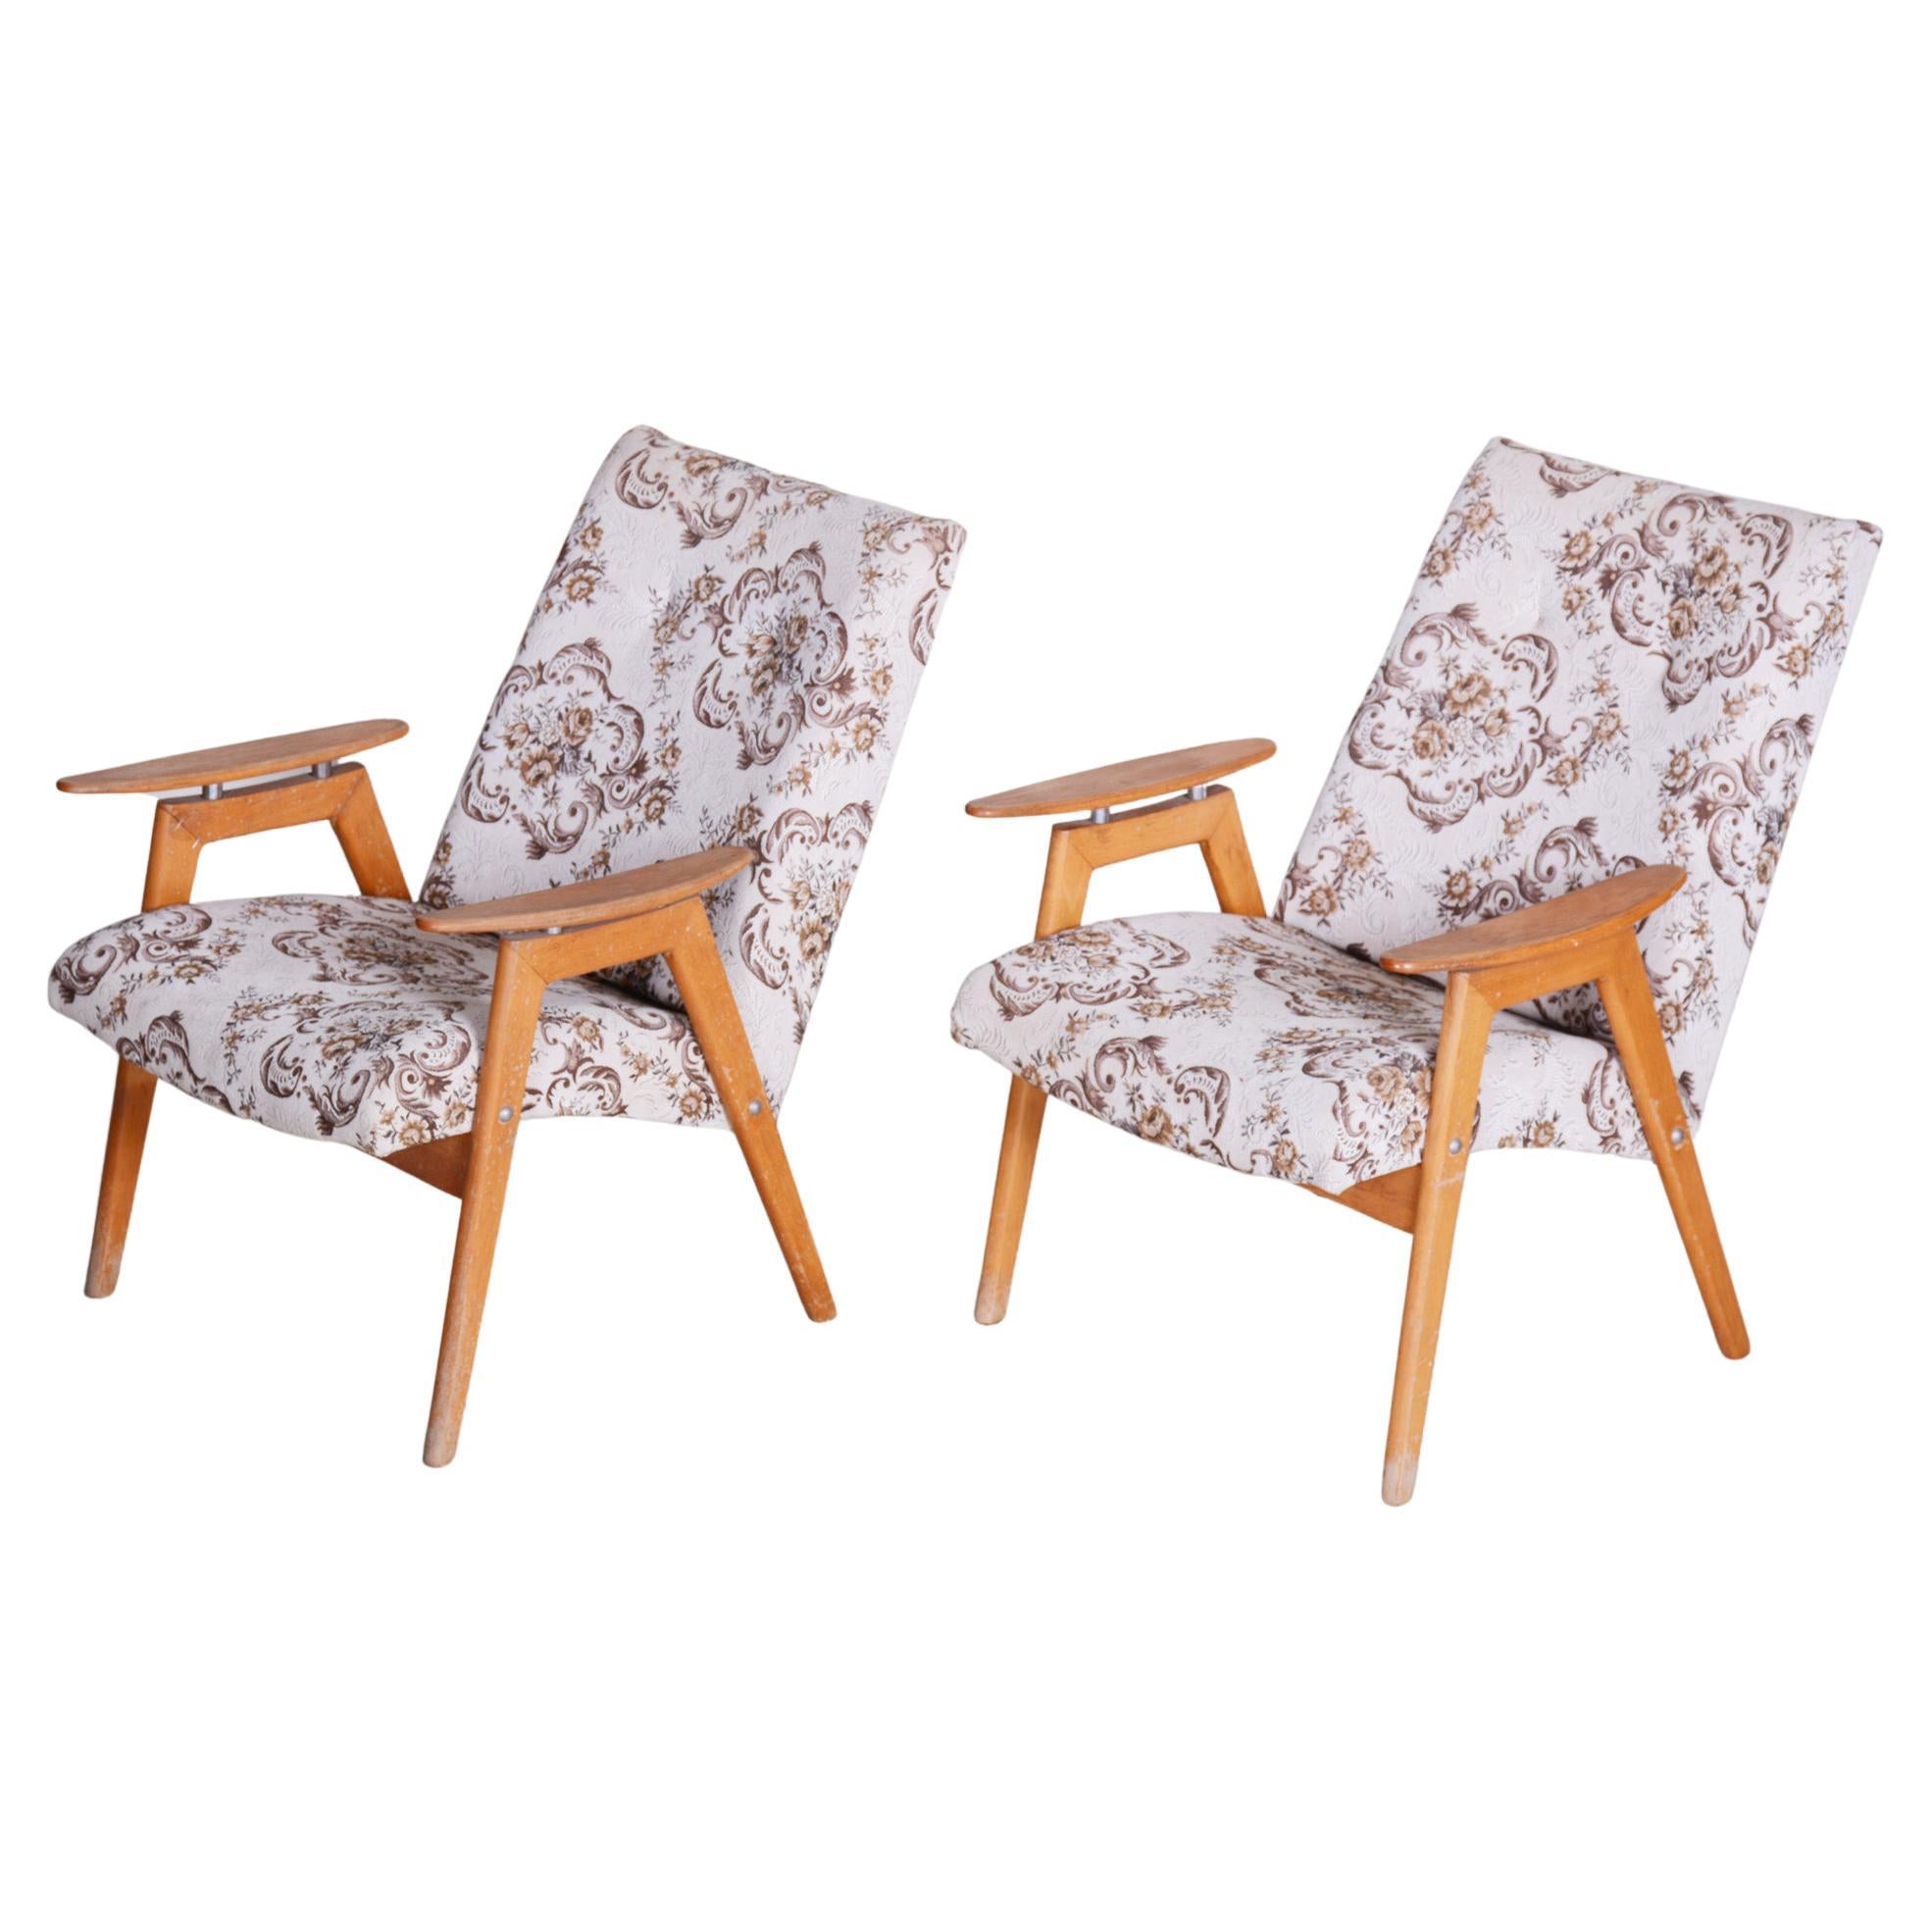 Pair of Beige Midcentury Armchairs, Made in Czechia, 1950s, Original Condition For Sale